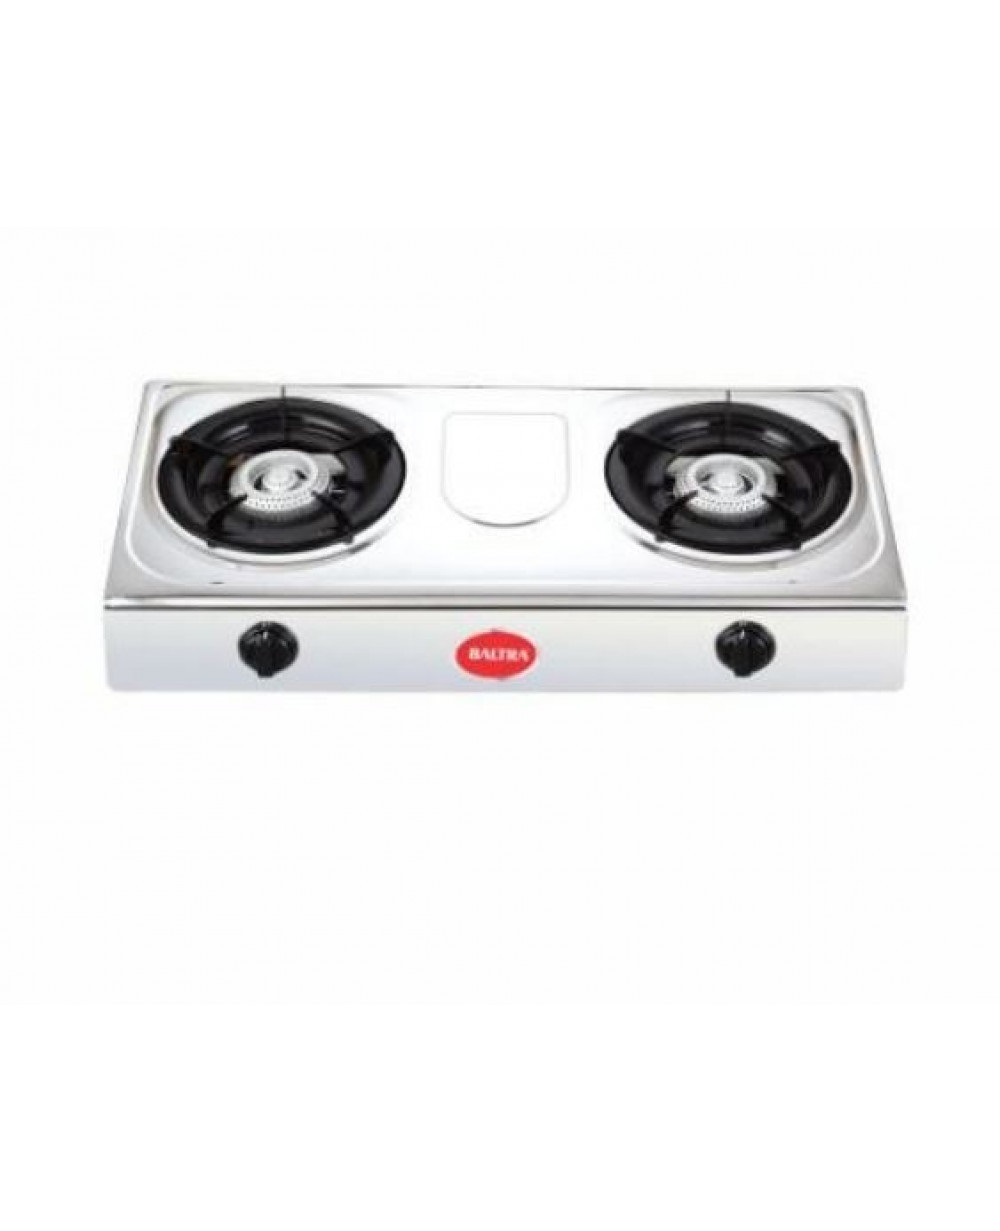 BALTRA Bliss LPG Stainless Steel Body Gas Stove